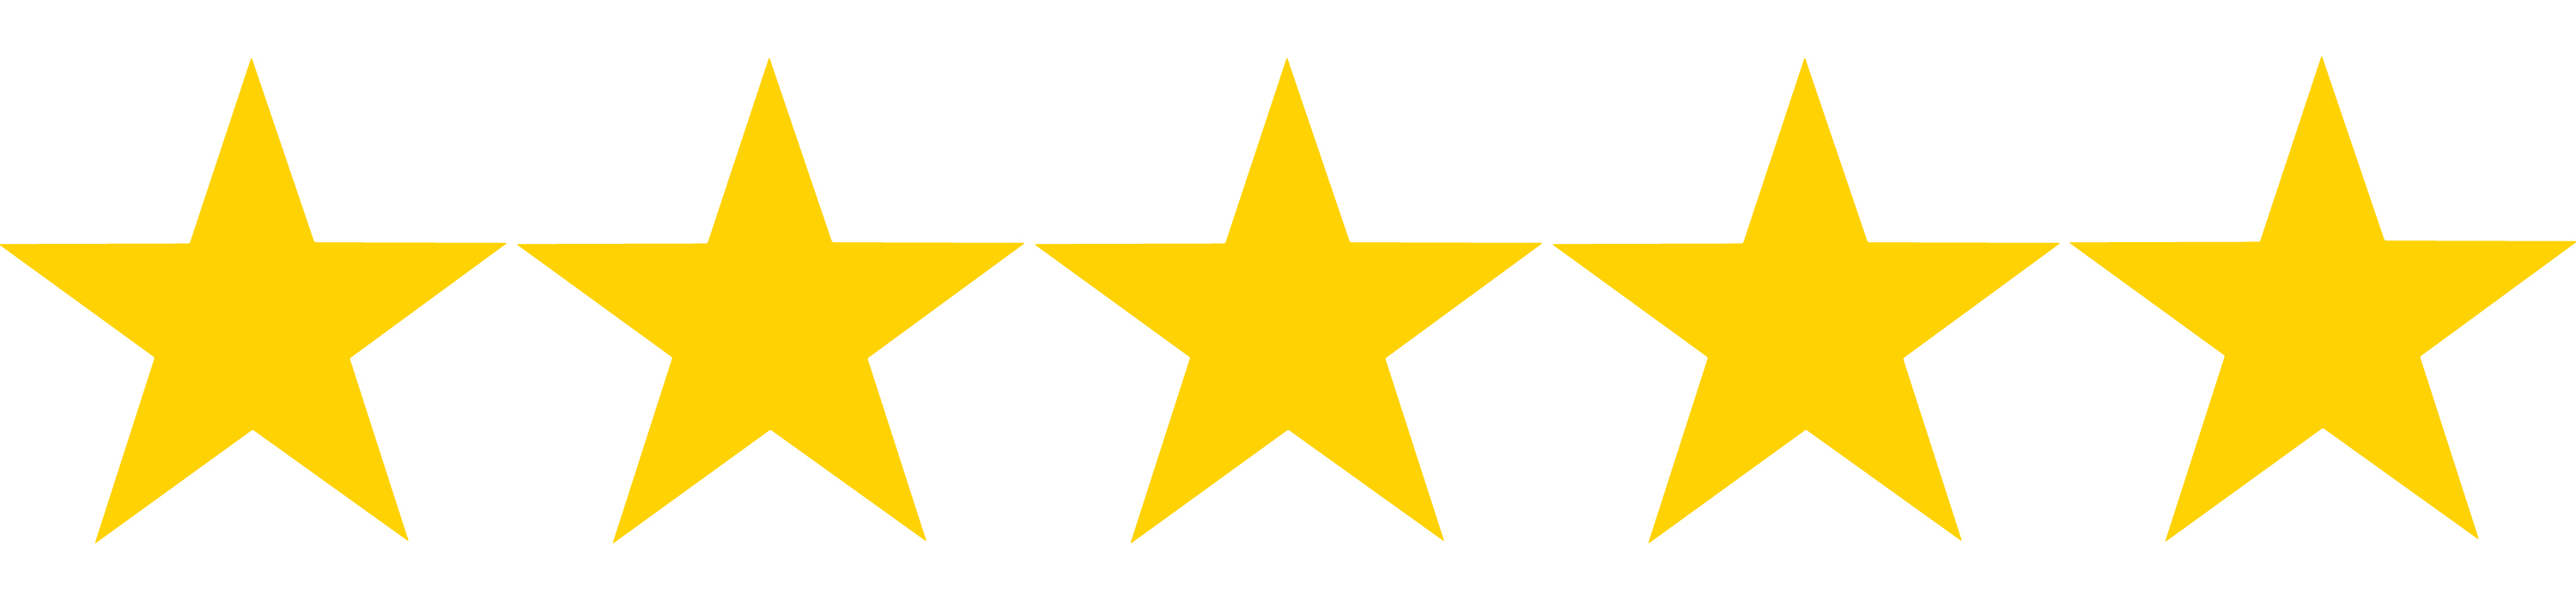 Free 5 Star Review Png, Download Free 5 Star Review Png png images ...